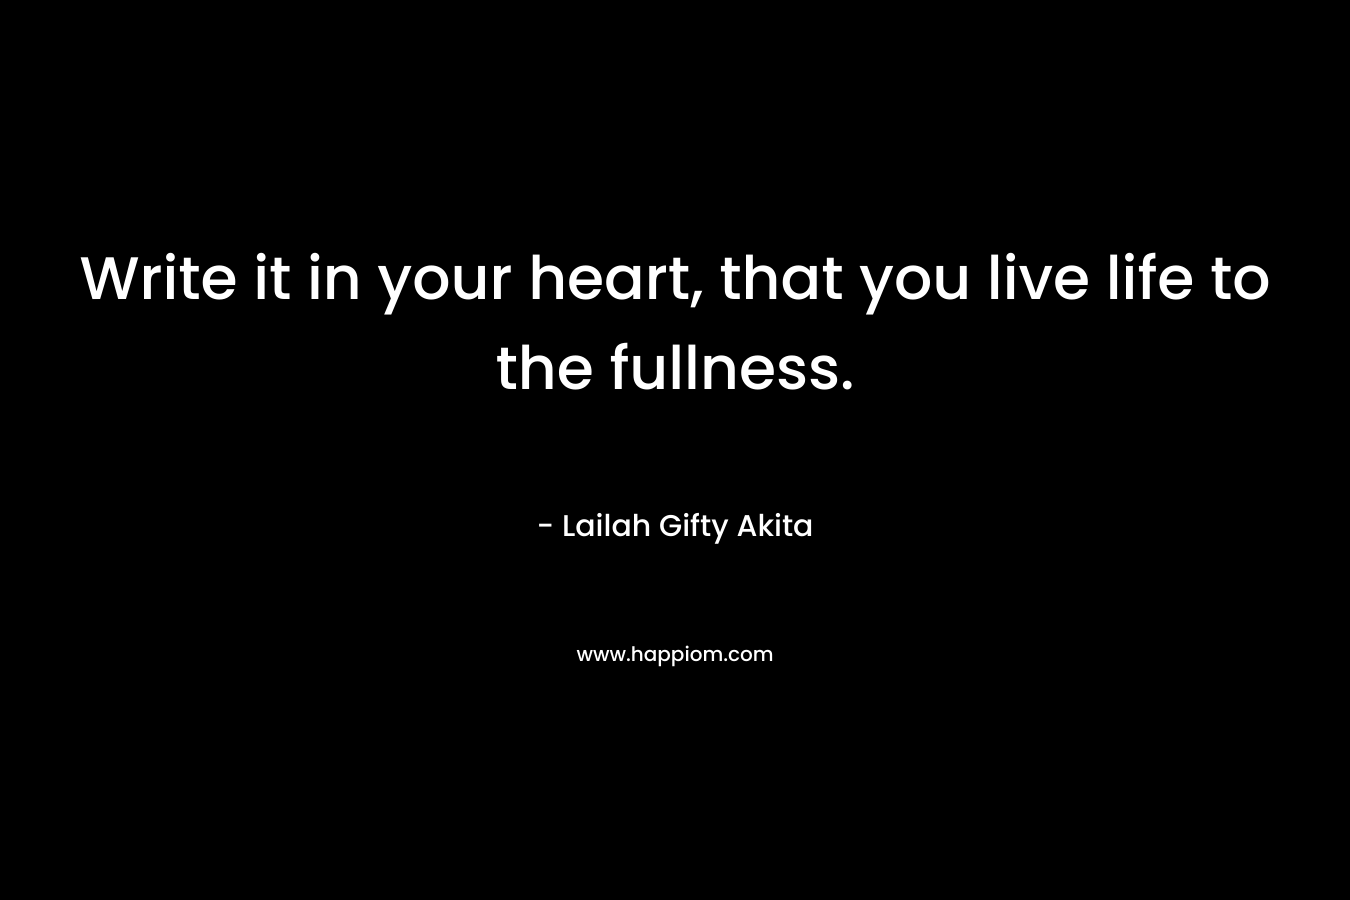 Write it in your heart, that you live life to the fullness.